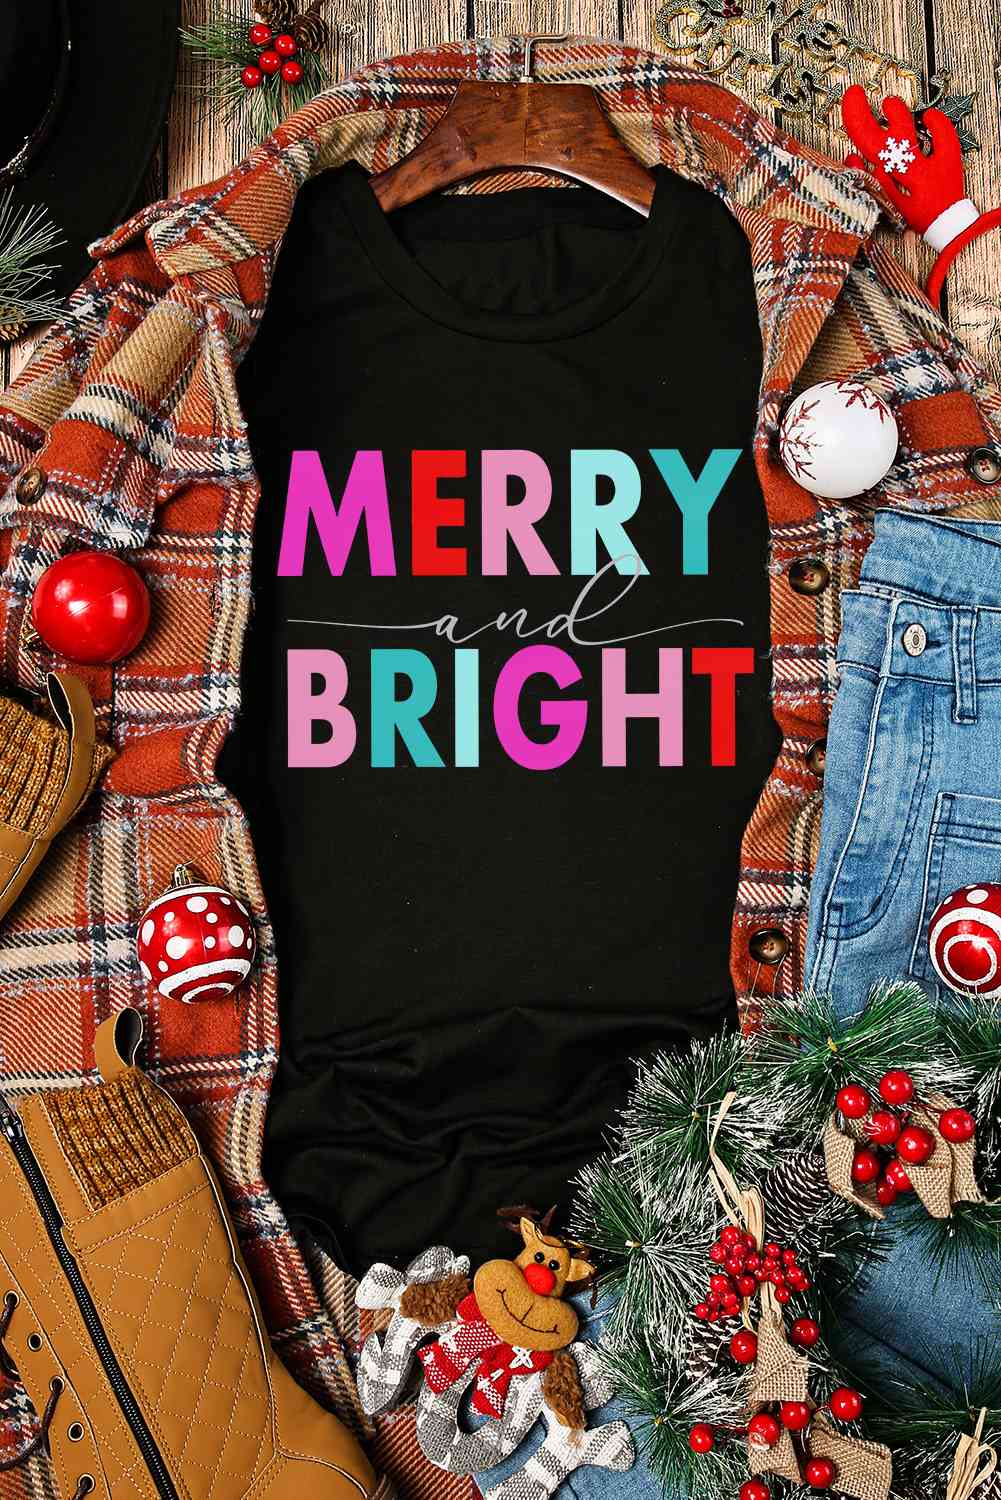 MERRY AND BRIGHT グラフィック半袖Tシャツ